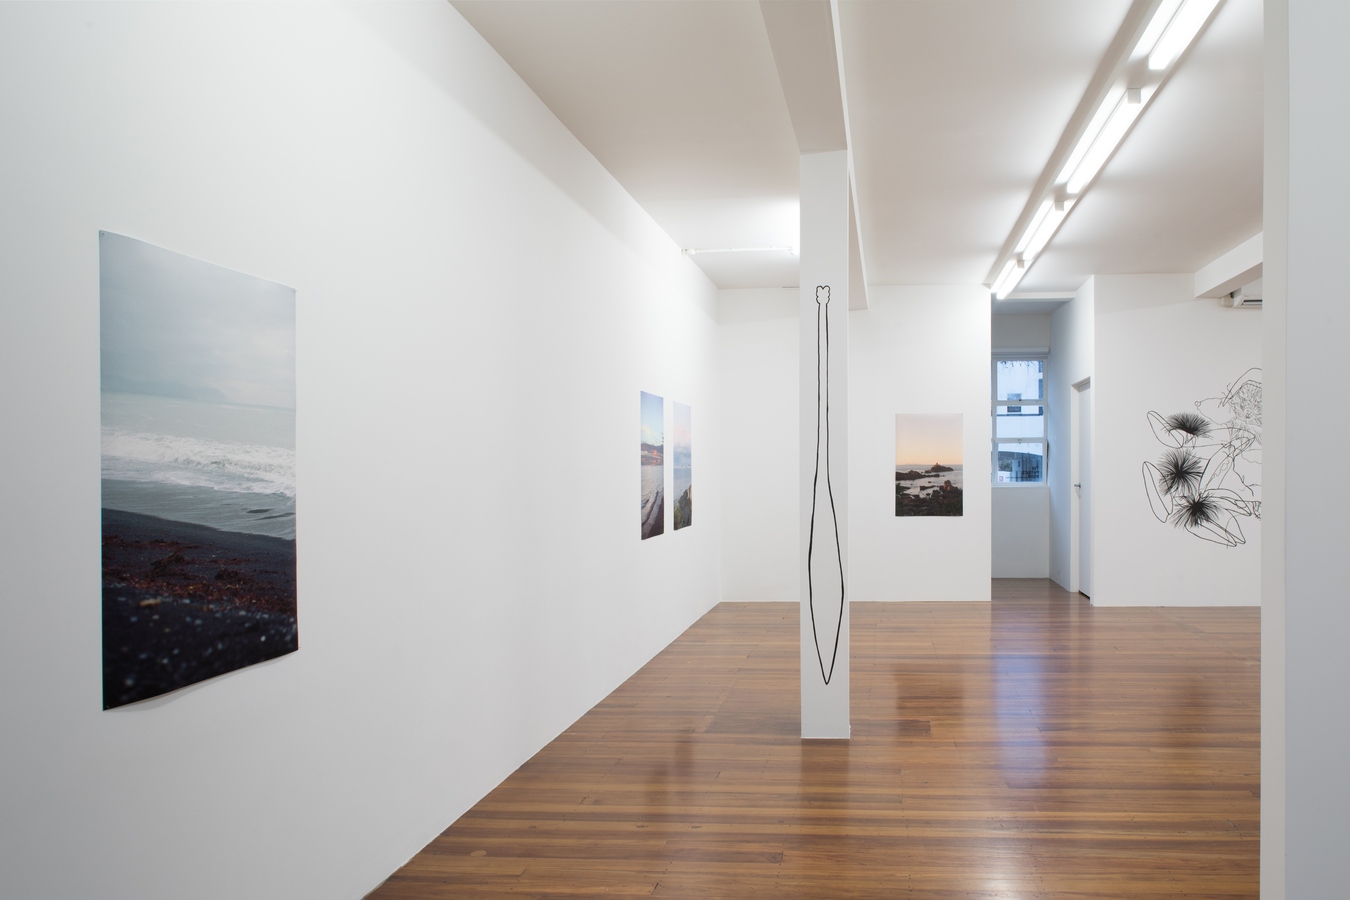 Image: Emily Parr, Surfacing (installation view), 2021. Photo: Janneth Gil.